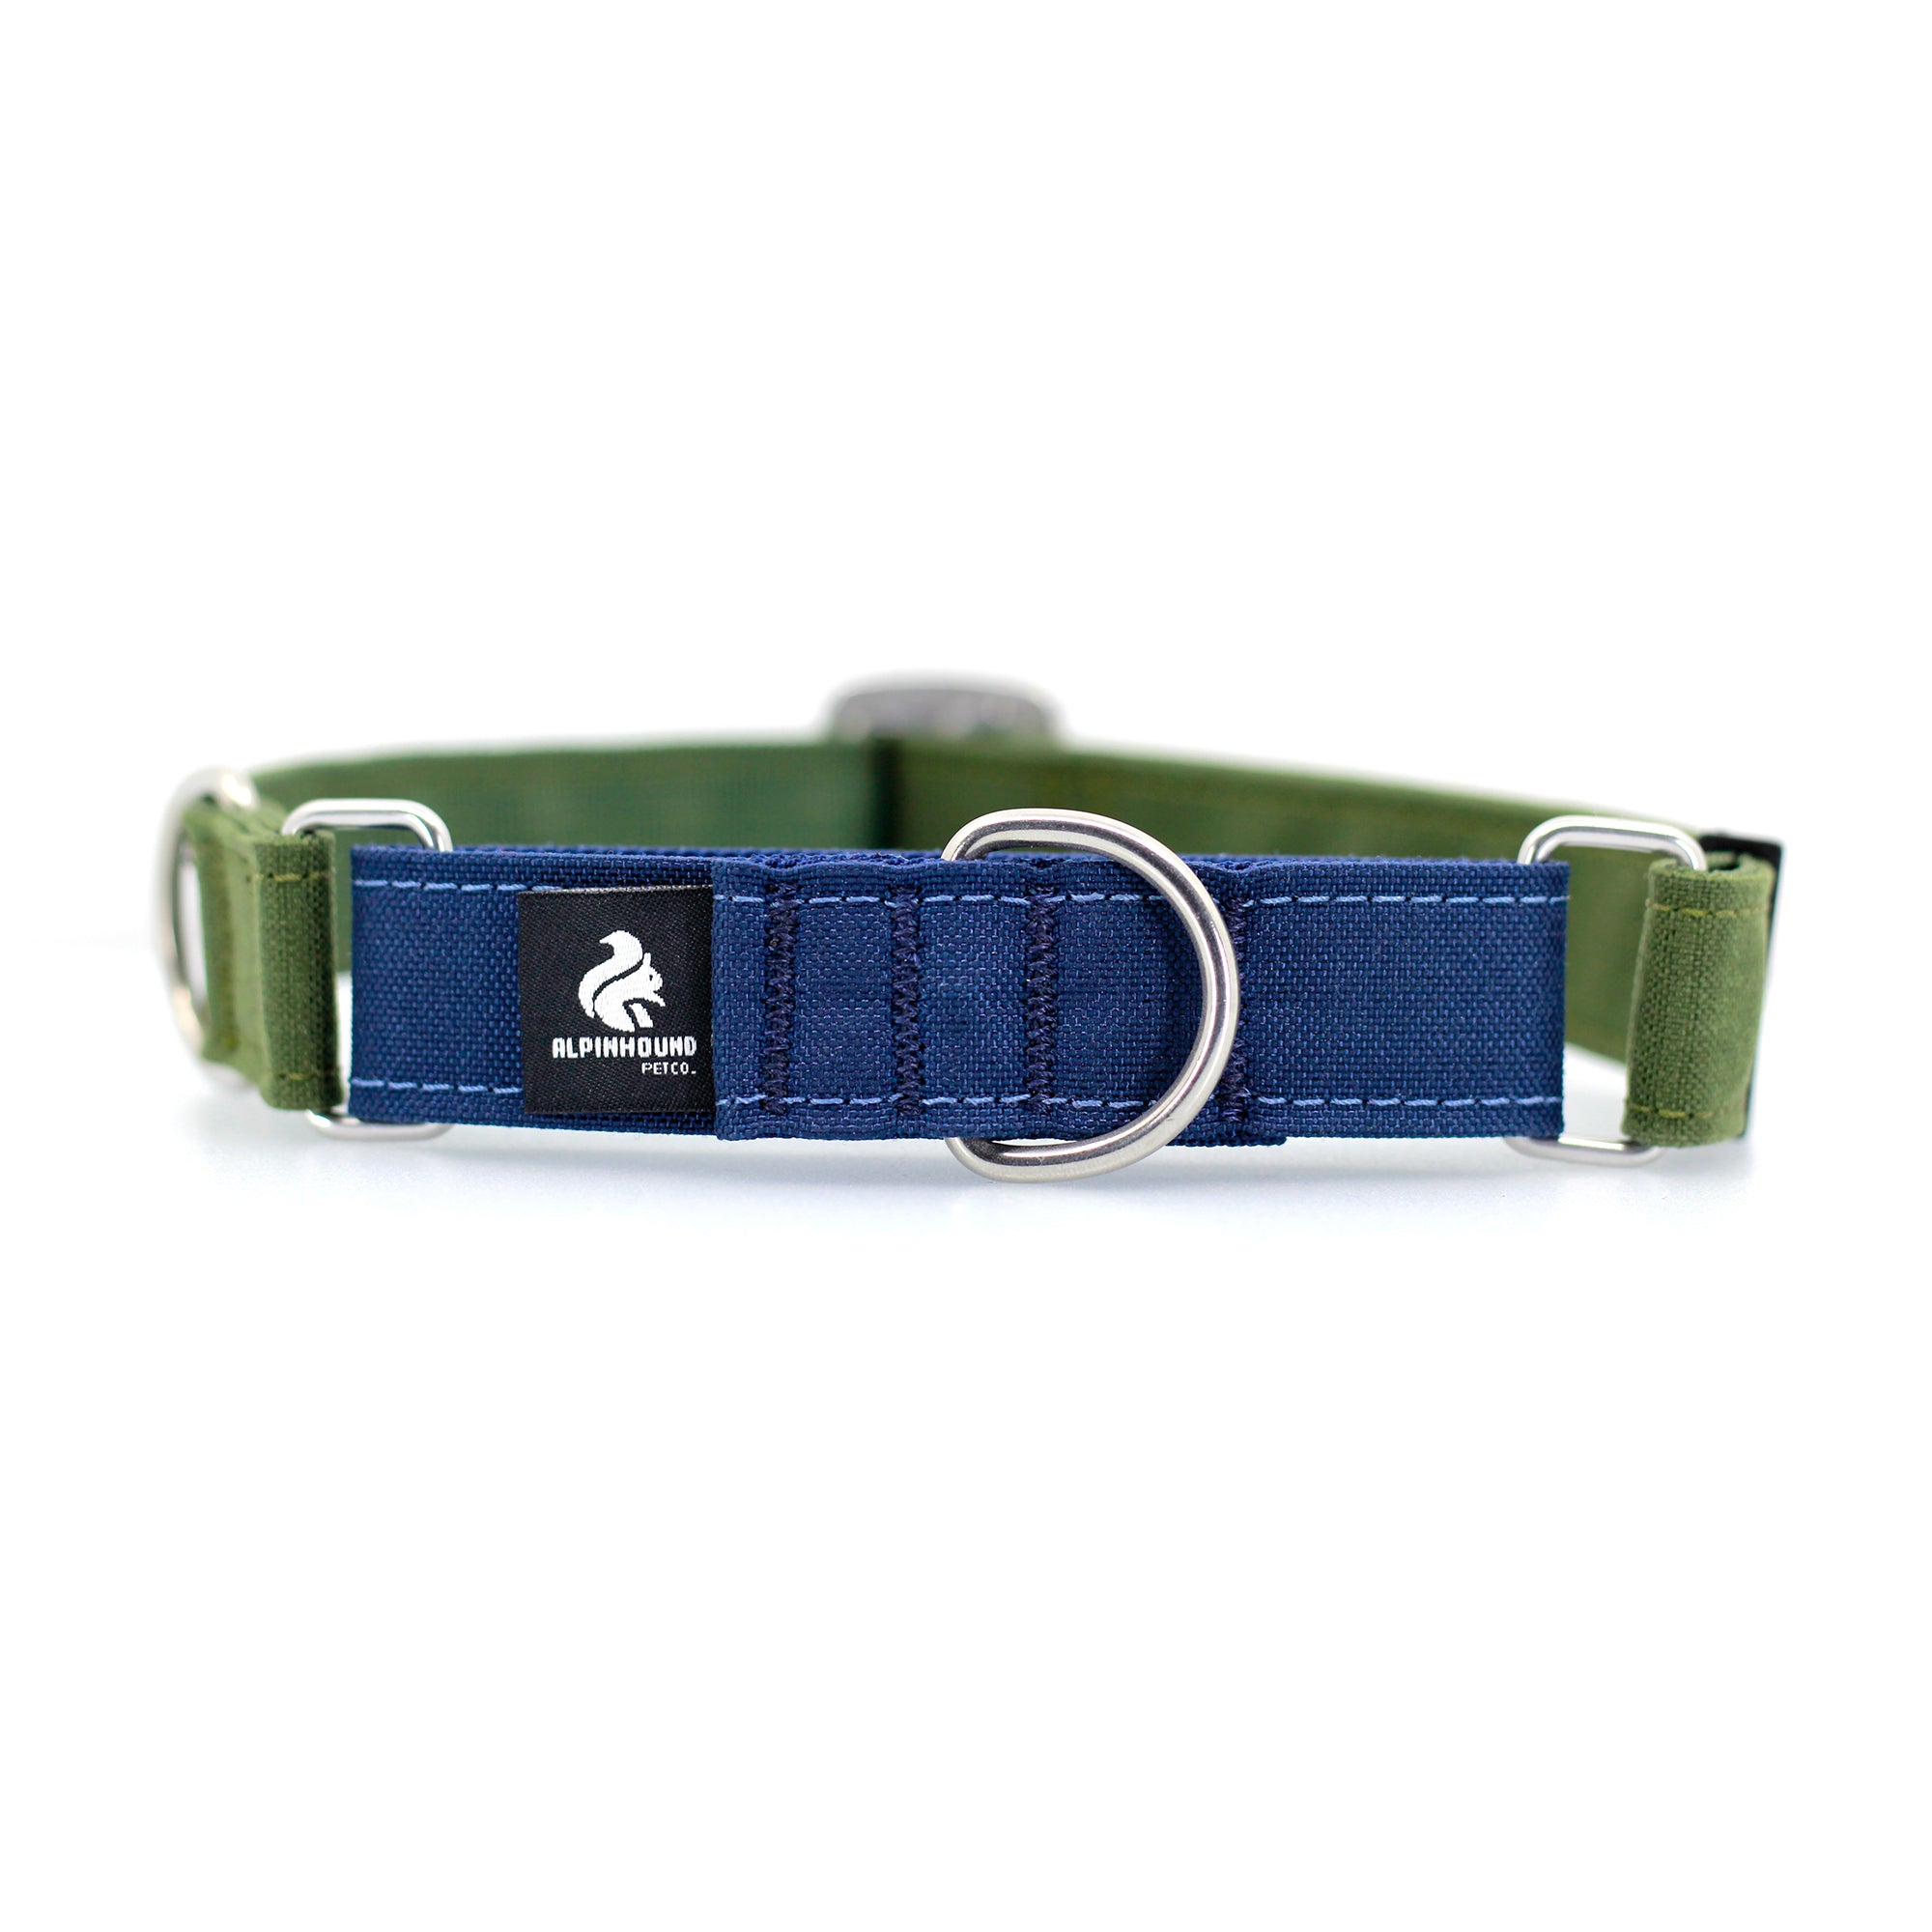 STNDRD Martingale Navy and Olive